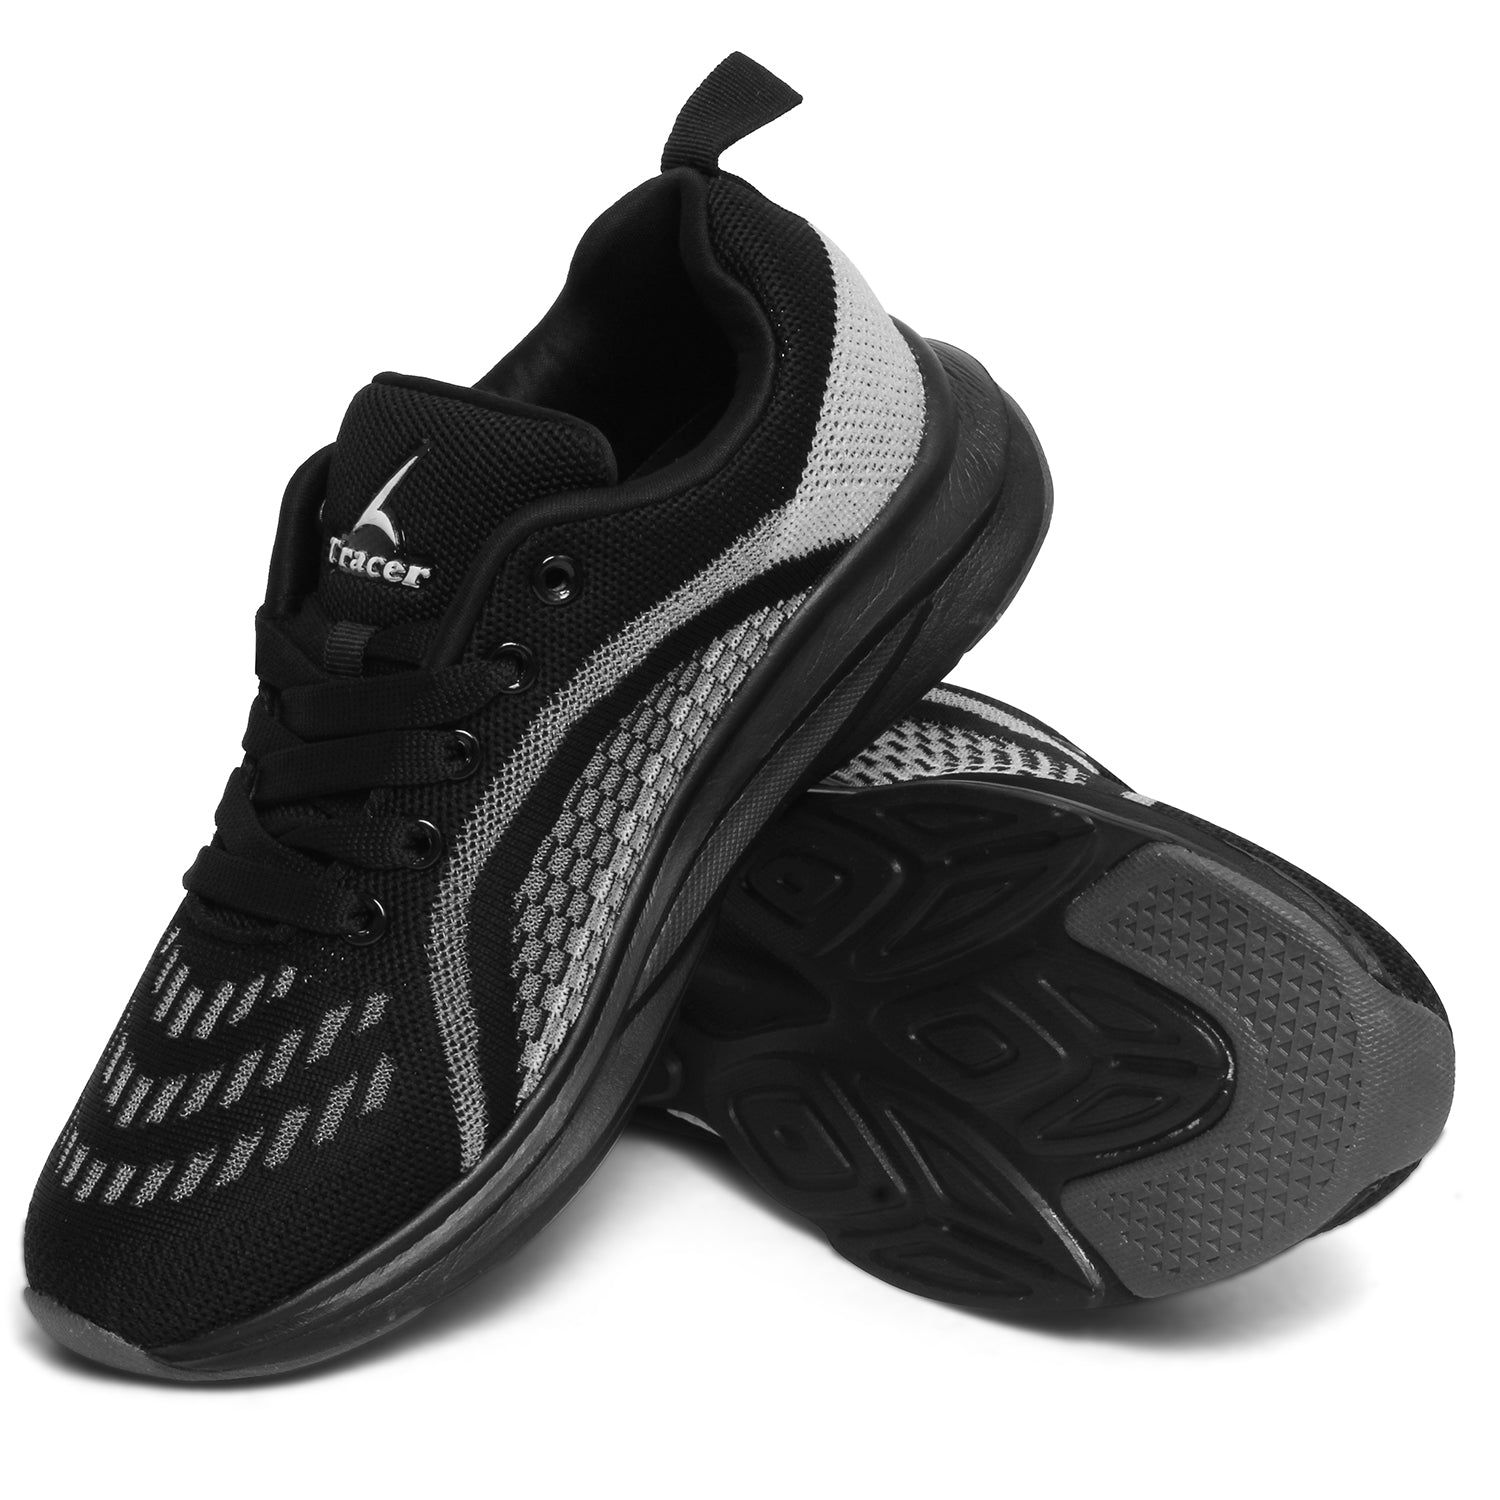 Tracer India Running Shoes for Women's Black